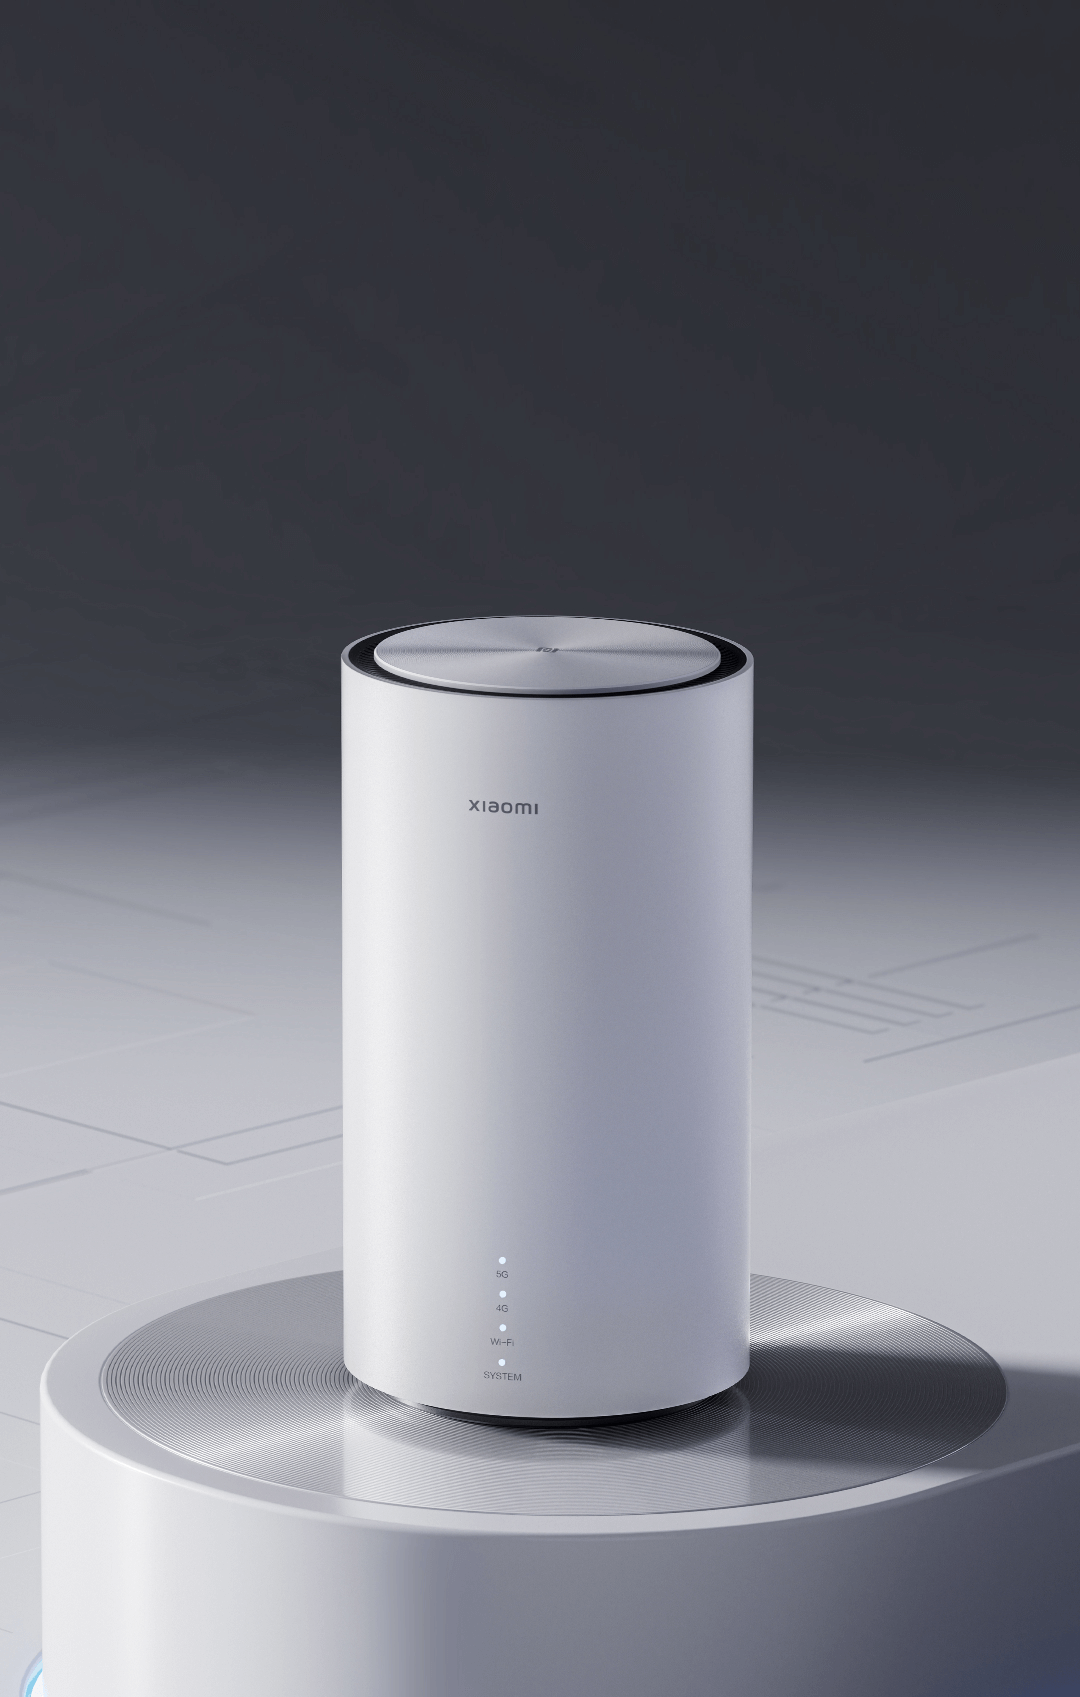 Seamless connectivity for home users with Xiaomi Wi-Fi 6 solutions